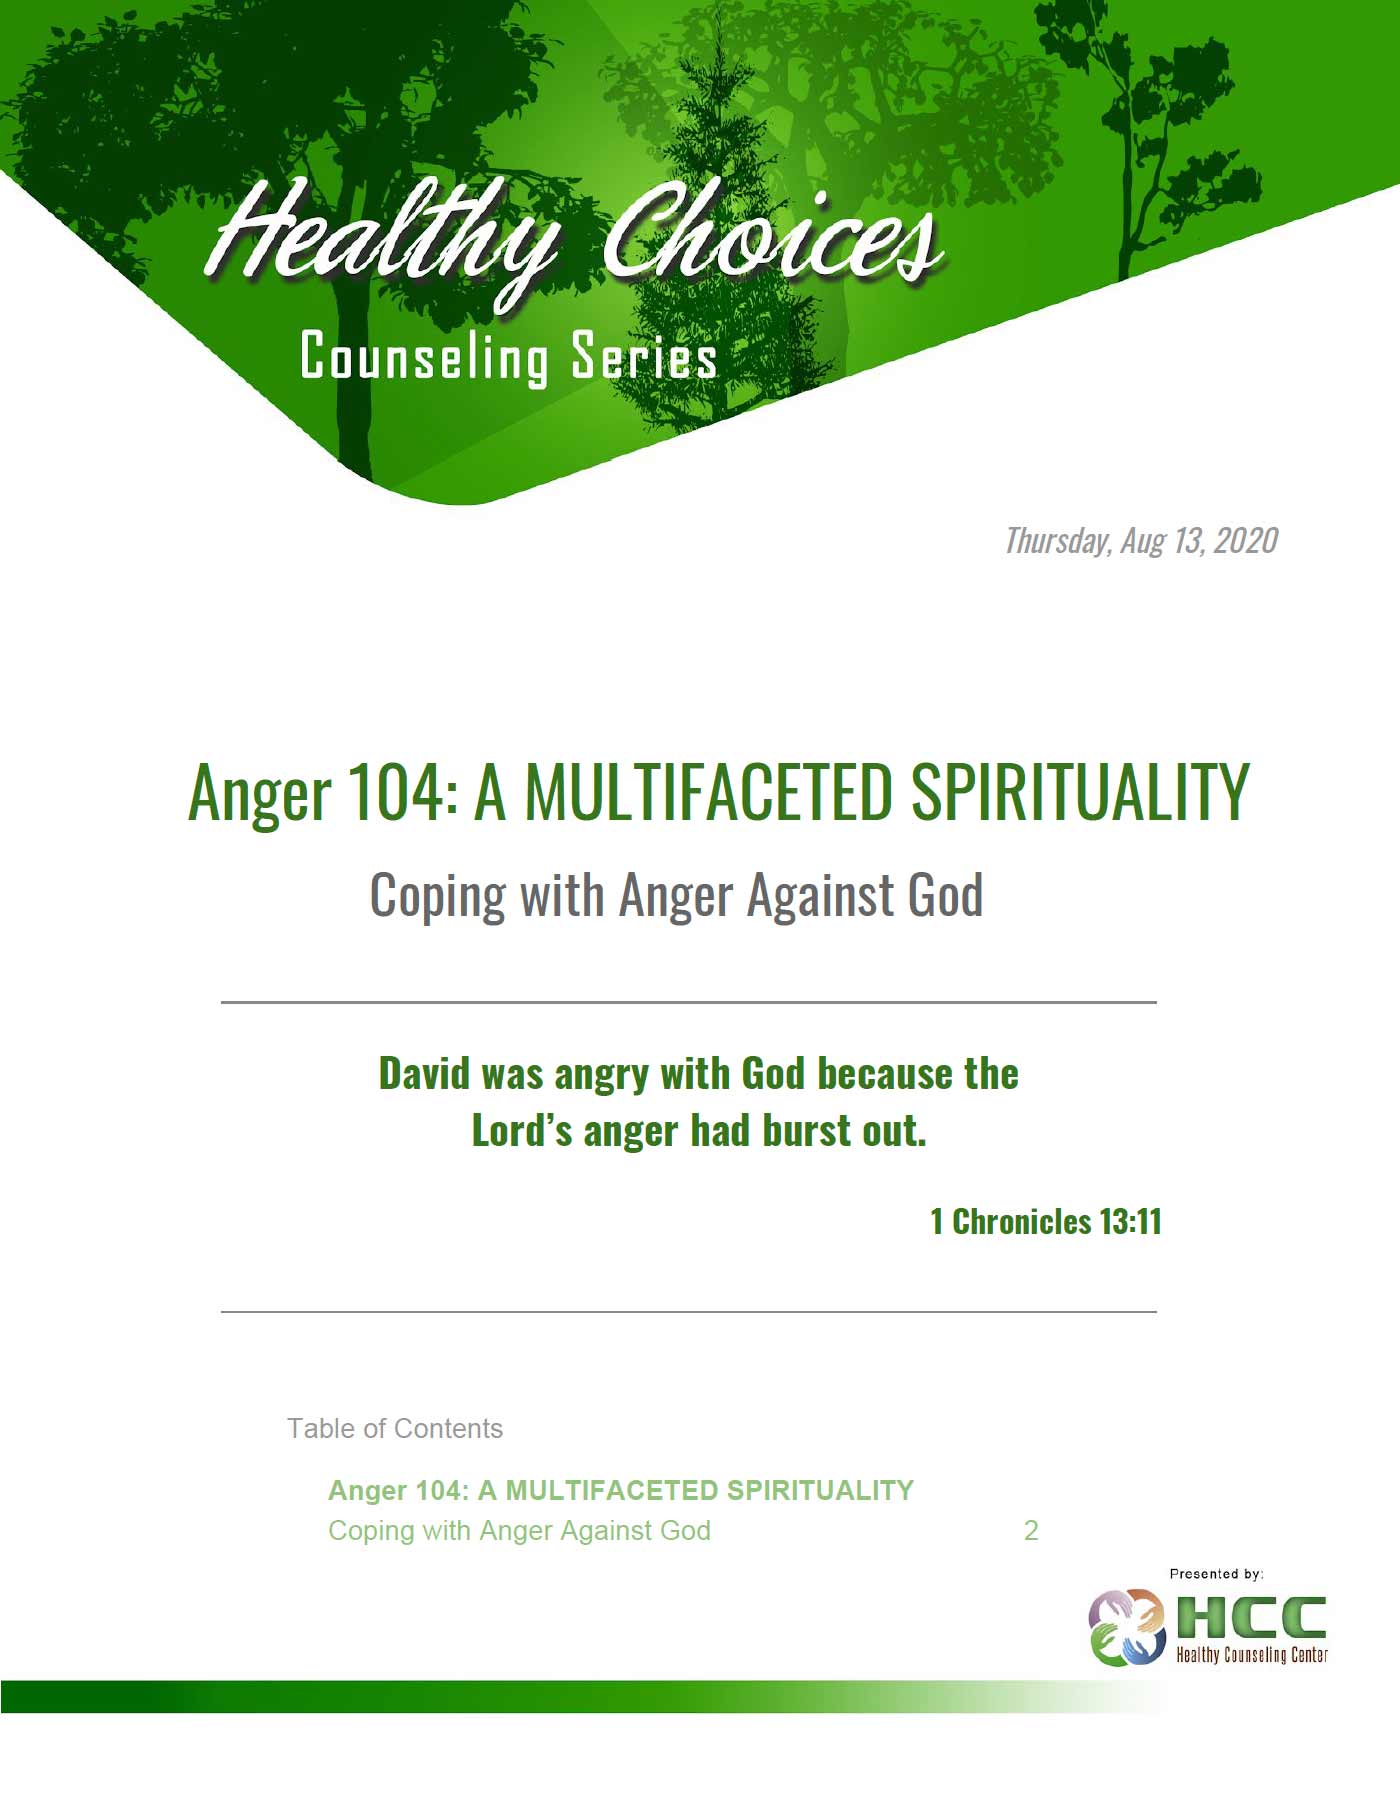 Anger 104: Coping with anger against God